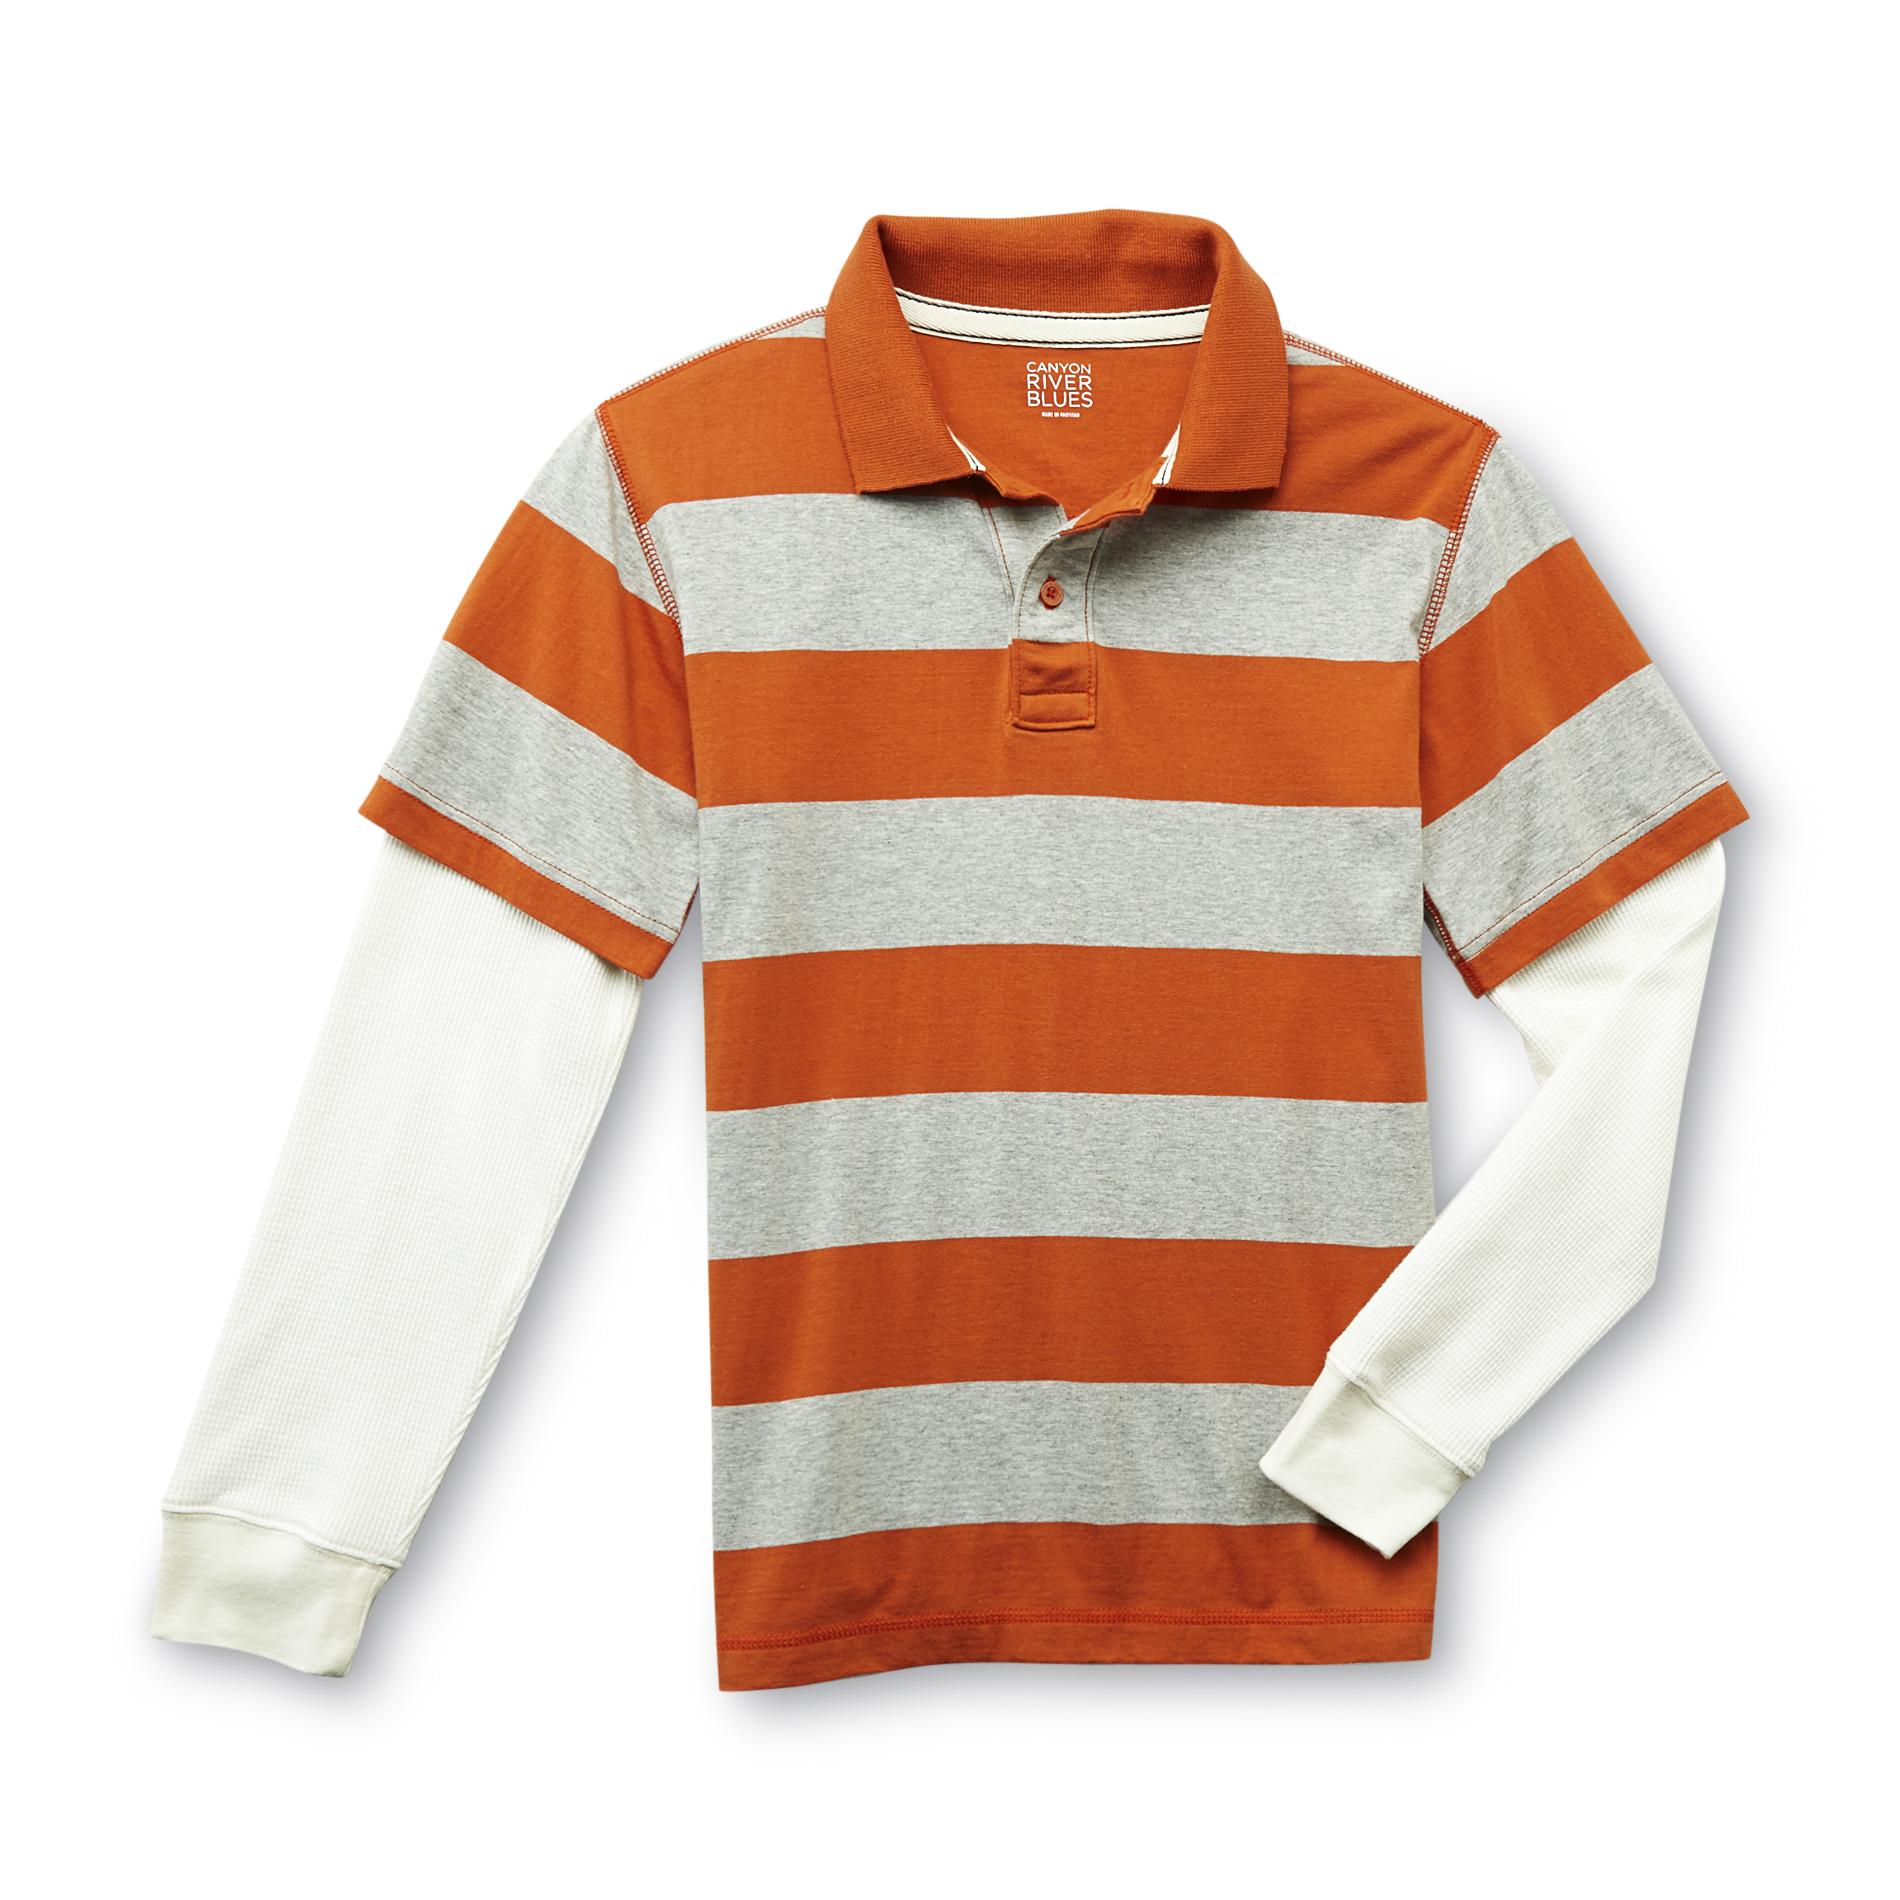 Canyon River Blues Boy's Layered-Look Polo Shirt - Rugby Stripes